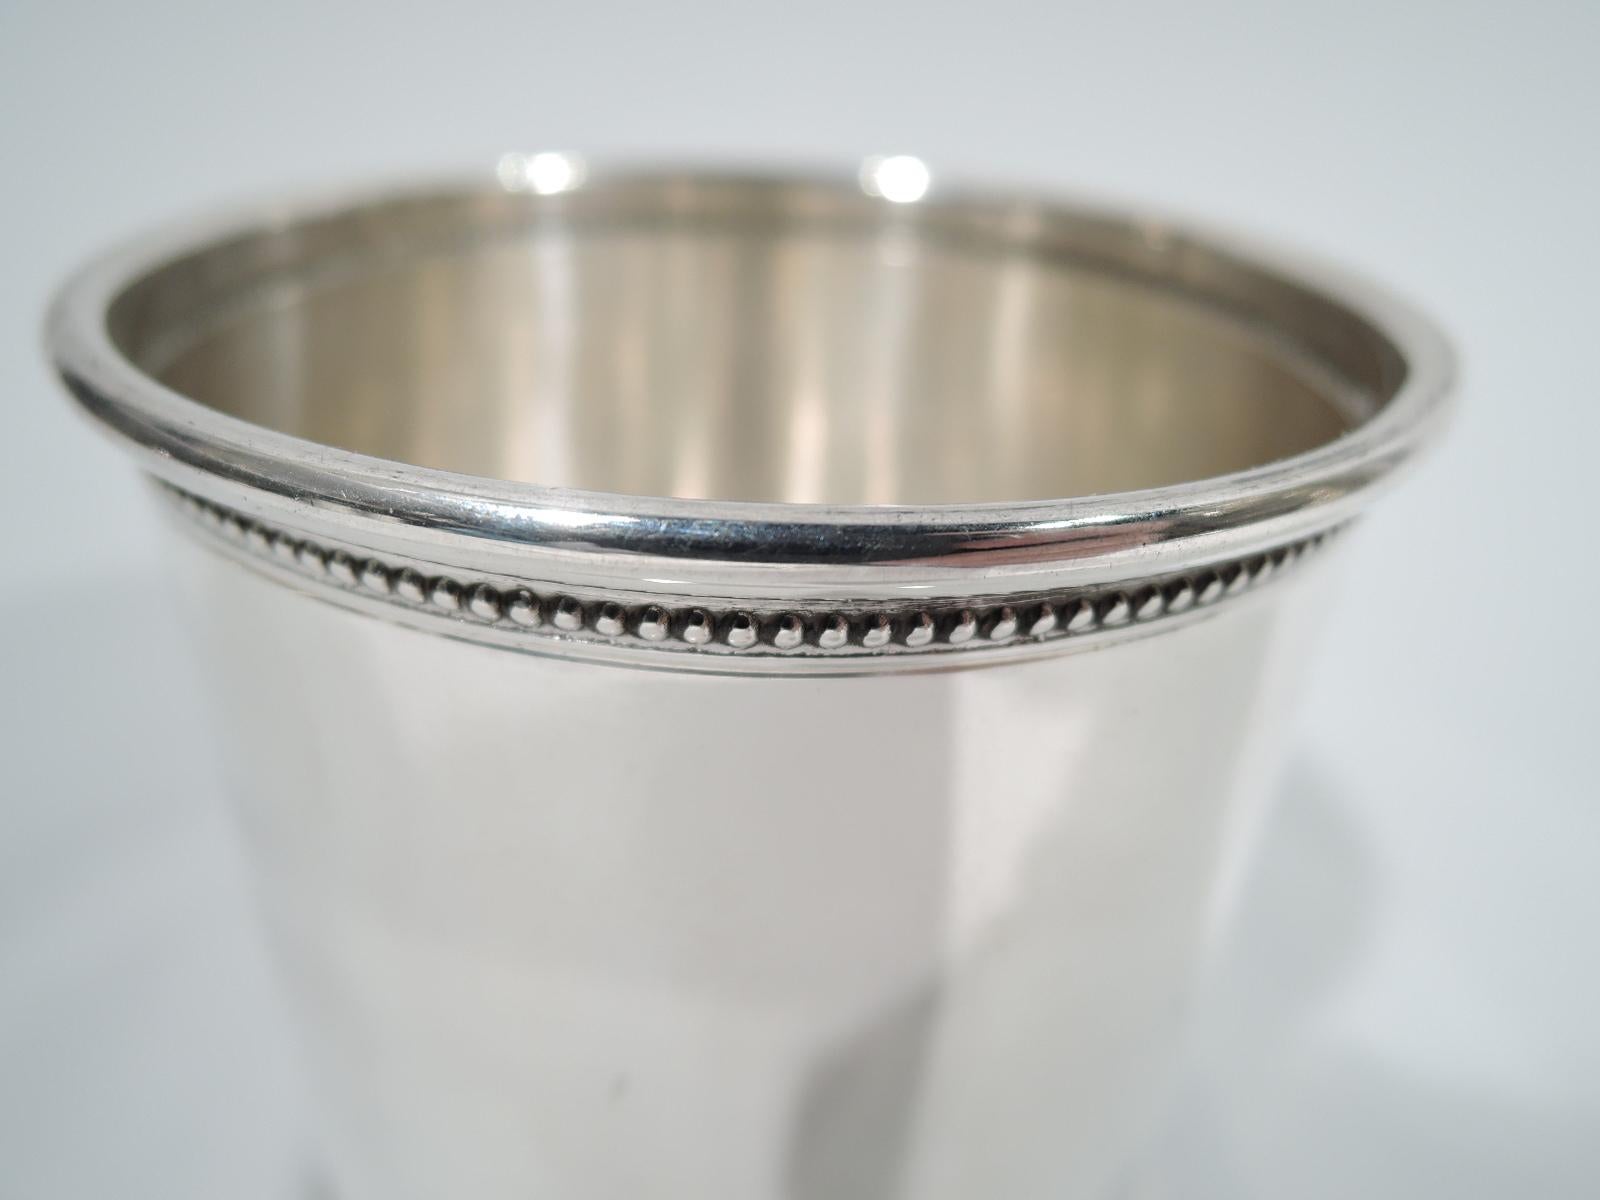 Modern Classical sterling silver mint julep cup. Retailed by Cartier in New York, circa 1930. Drum-form with straight sides. Top rim beeded and bottom rim imbricated leaf-and-berry. The perfect home-alone, lockdown-era solo sipping vessel. Fully